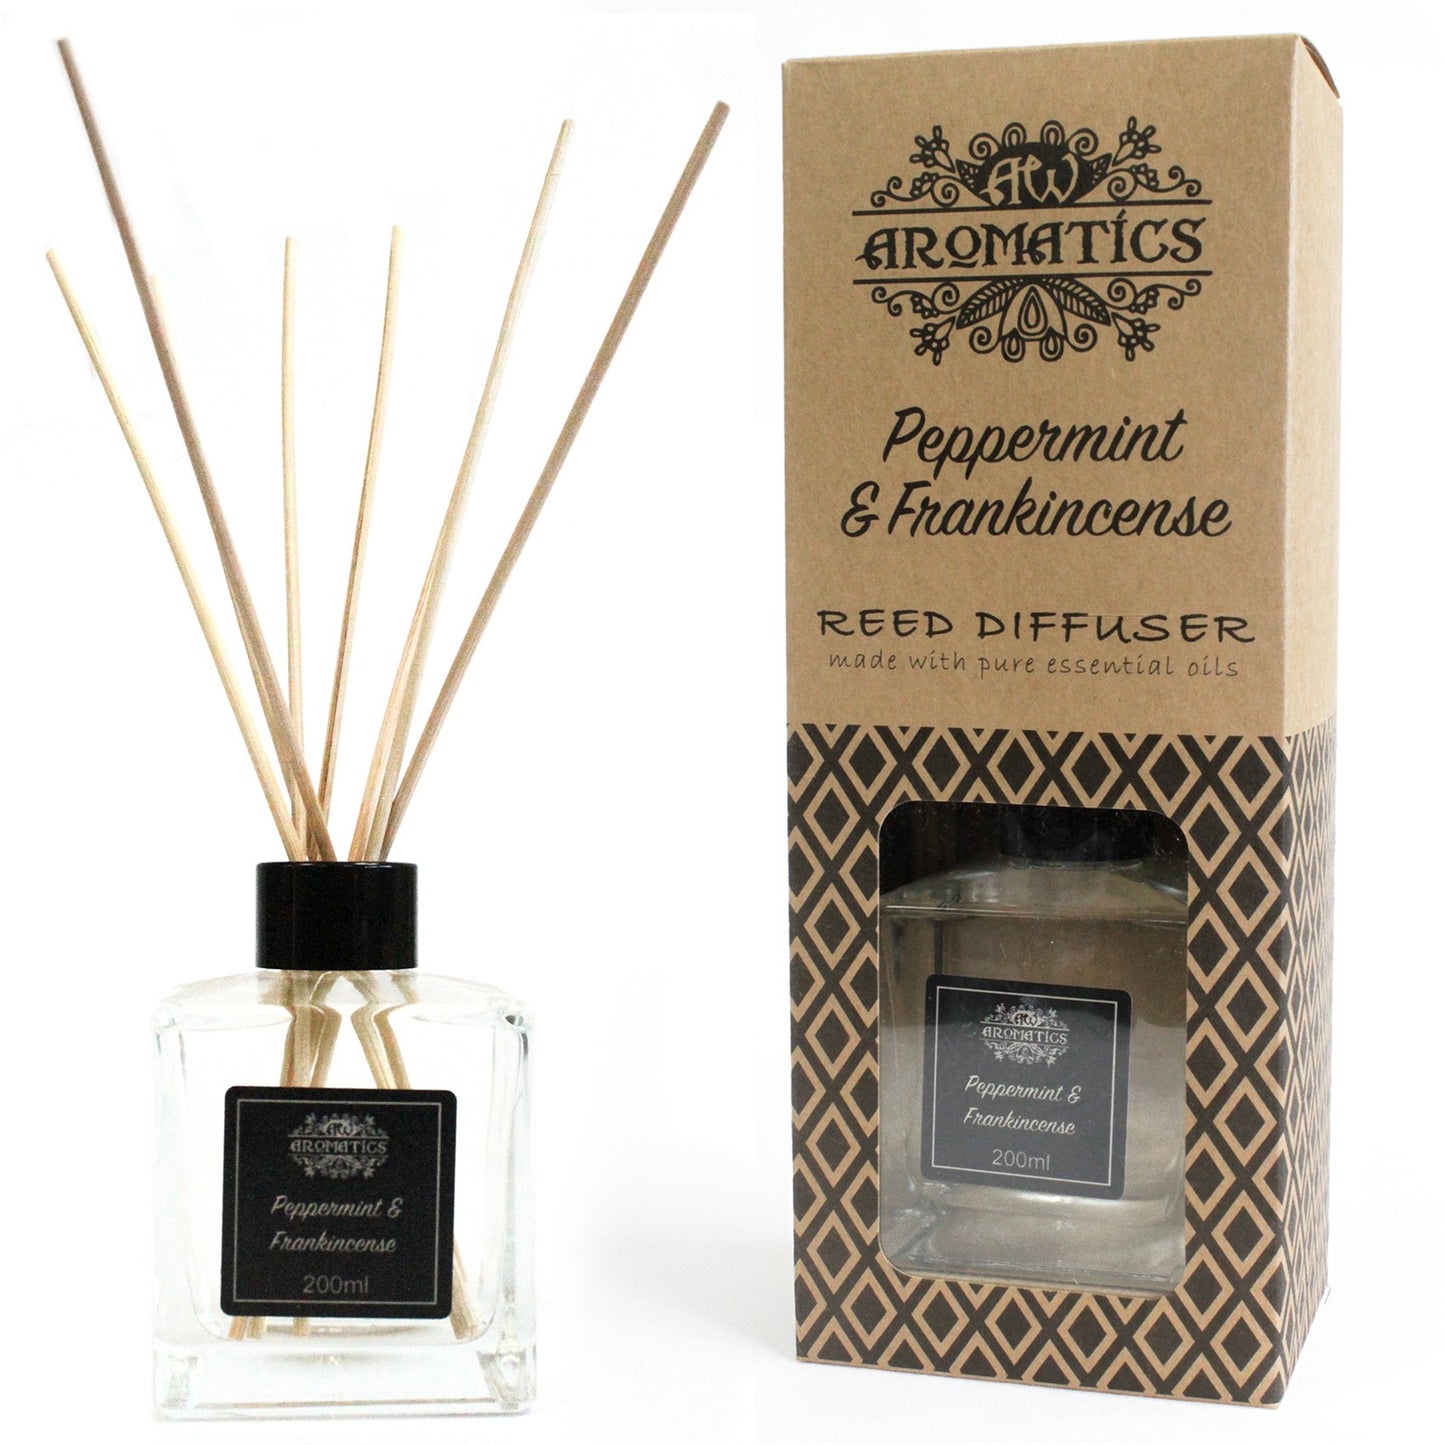 Peppermint & Frankincense Essential Oil Reed Diffuser - 200ml